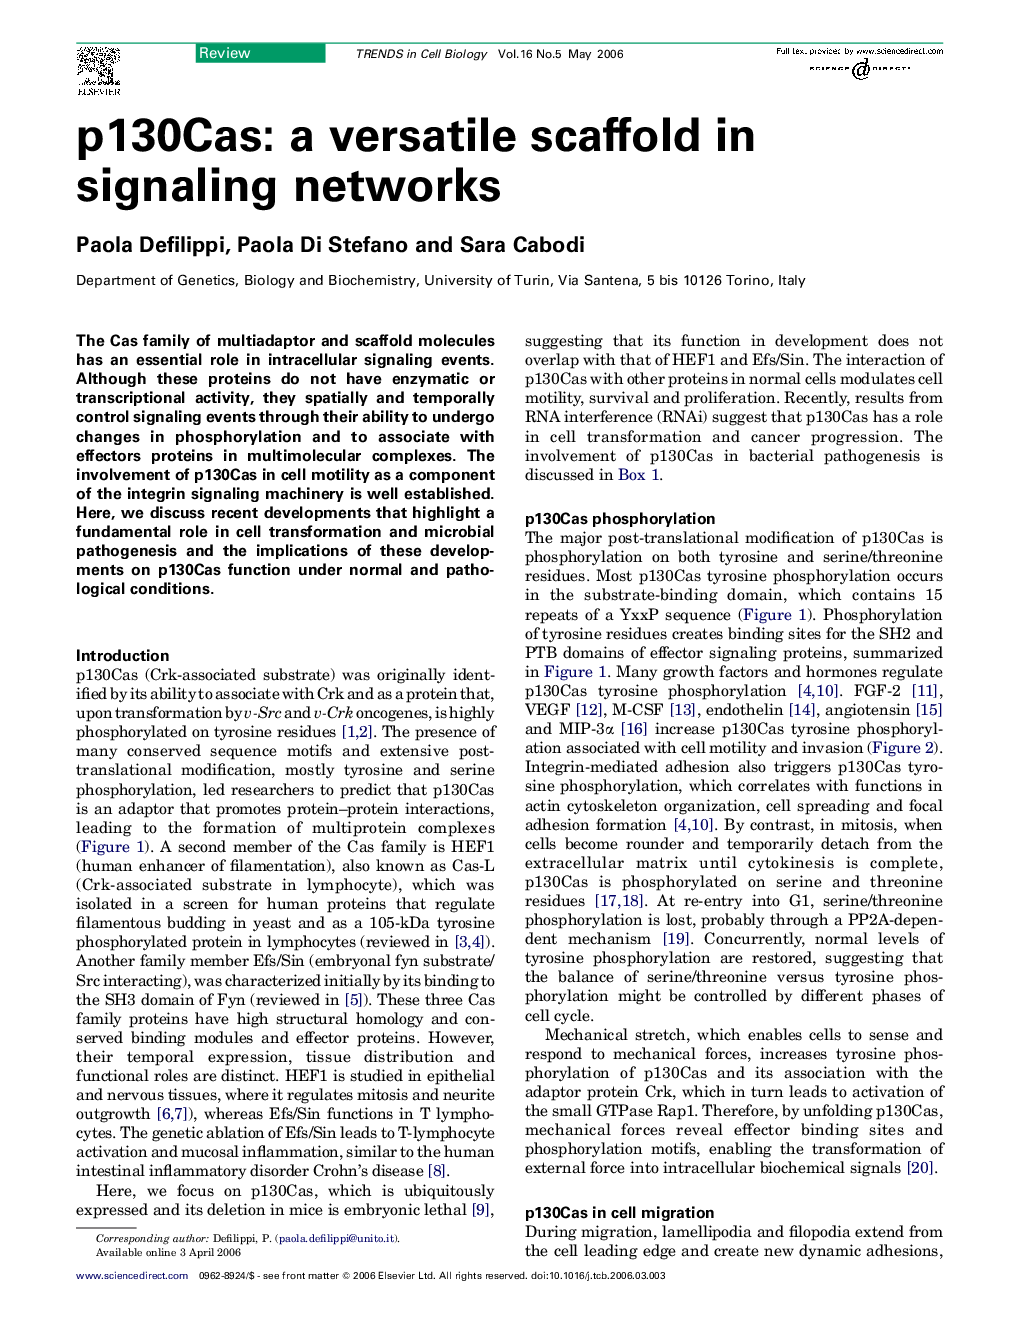 p130Cas: a versatile scaffold in signaling networks